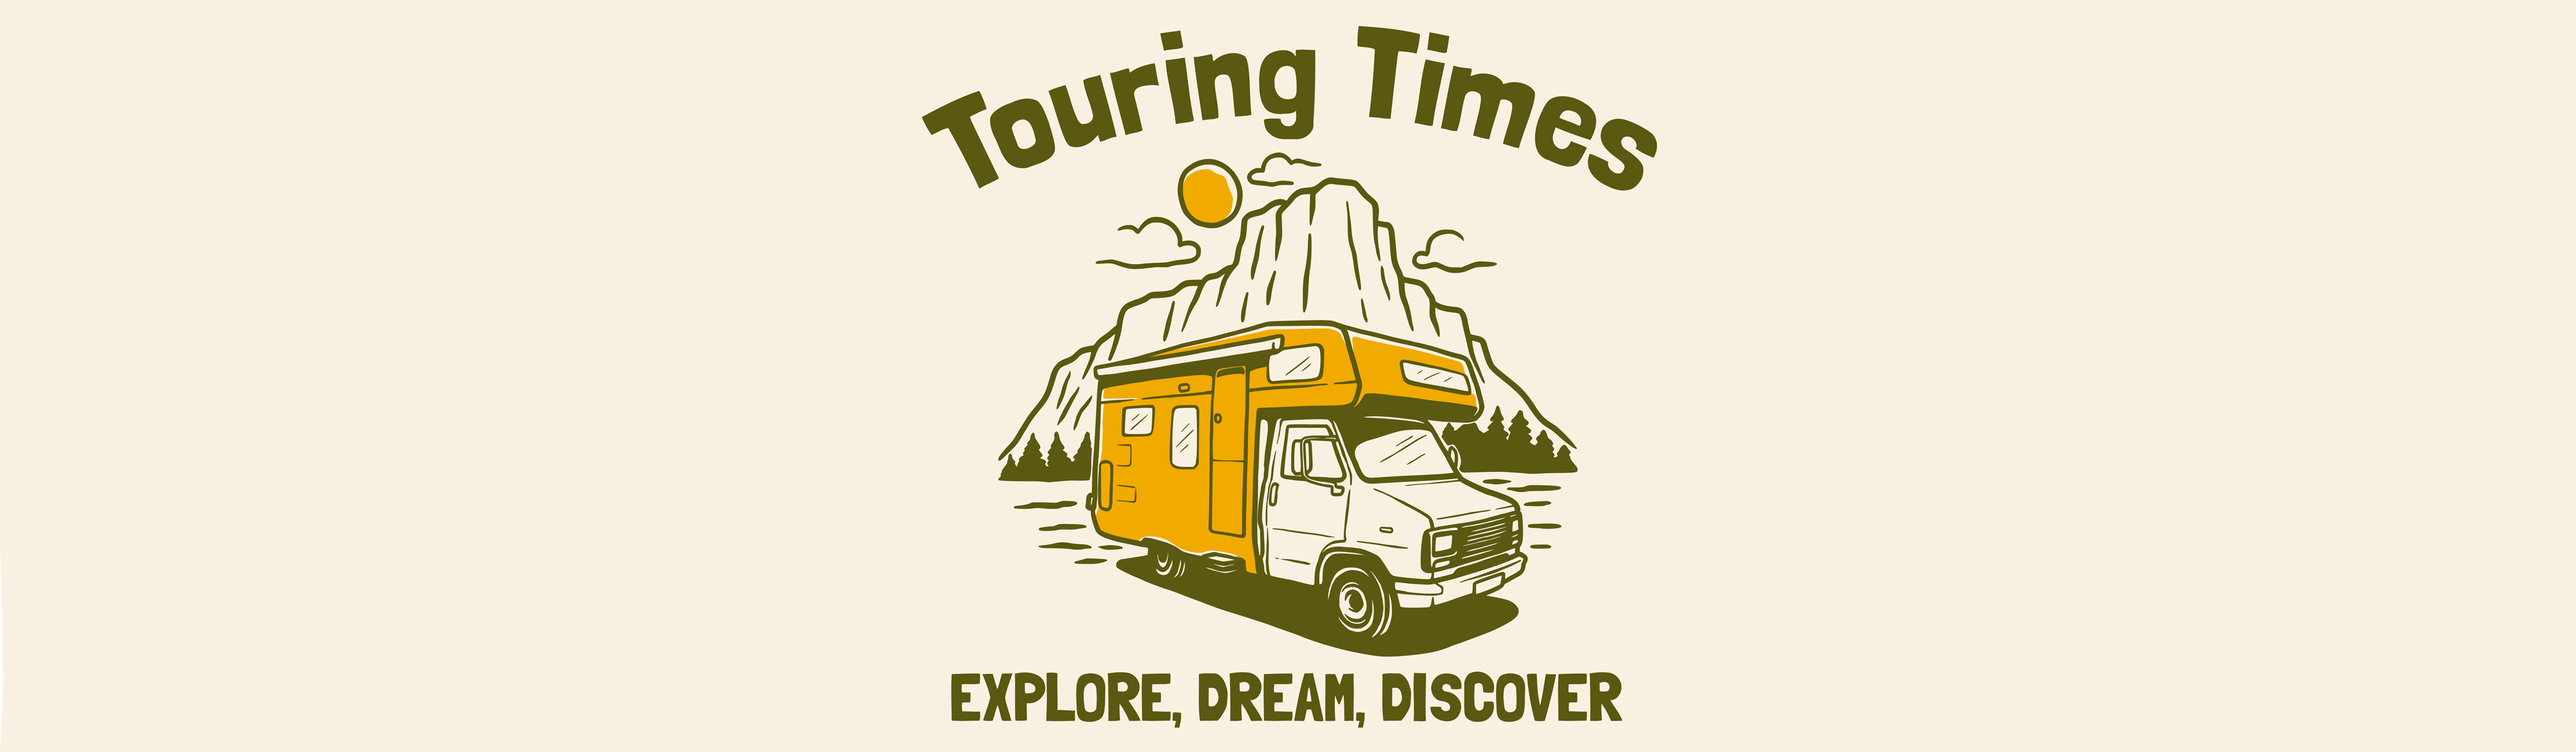 Touring Times Feature Image Landscape Wide